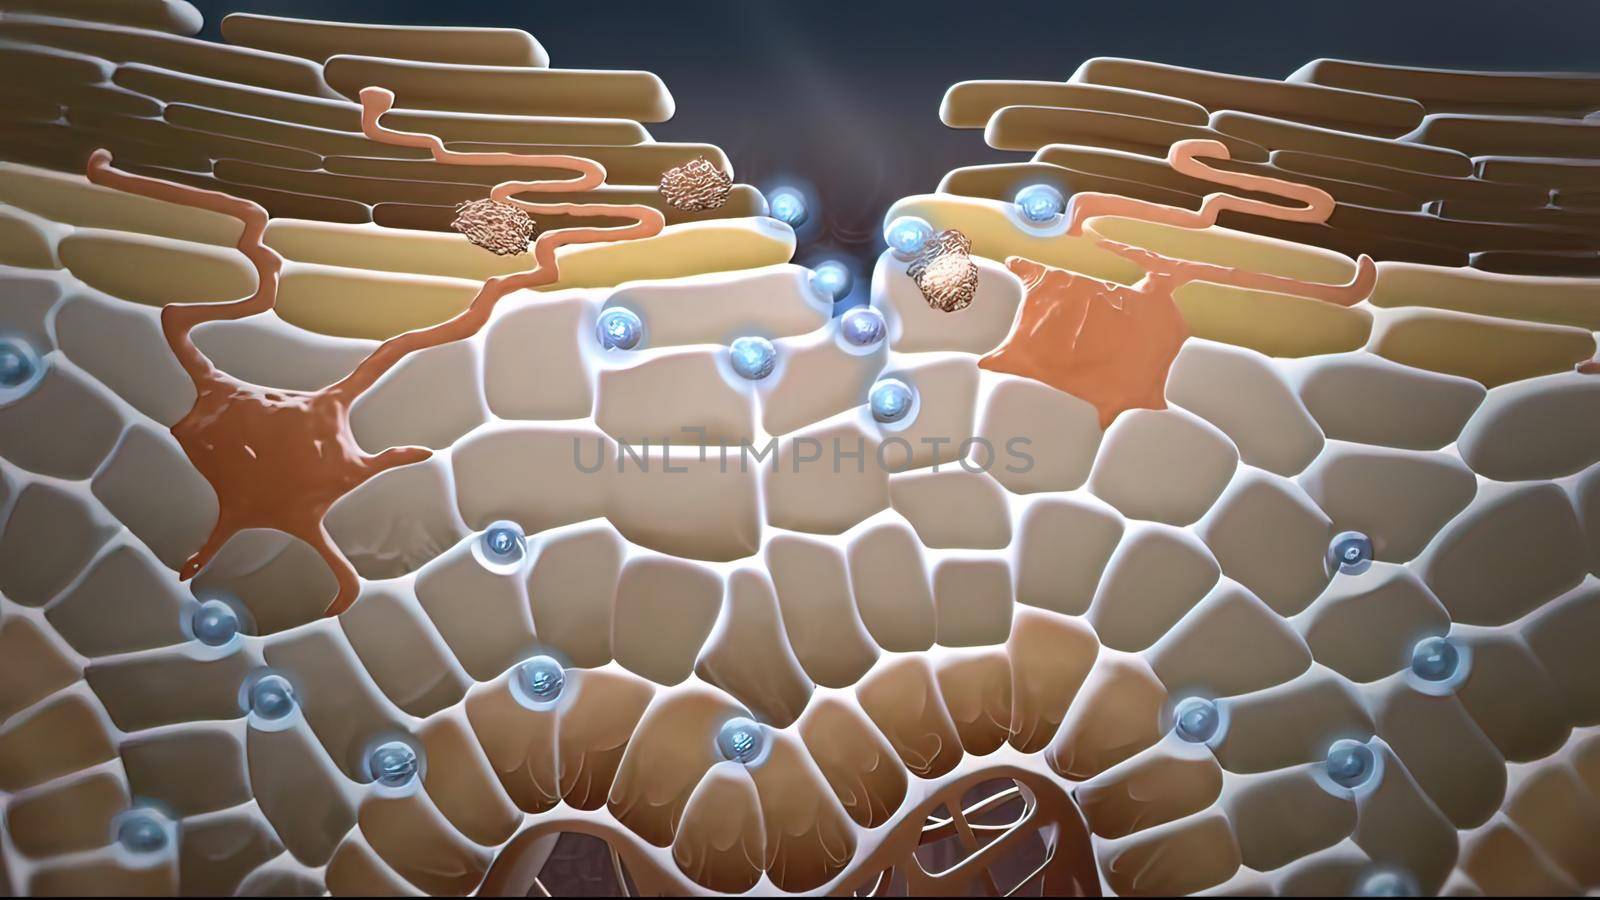 Inflammation and swelling of the skin 3D illustration,